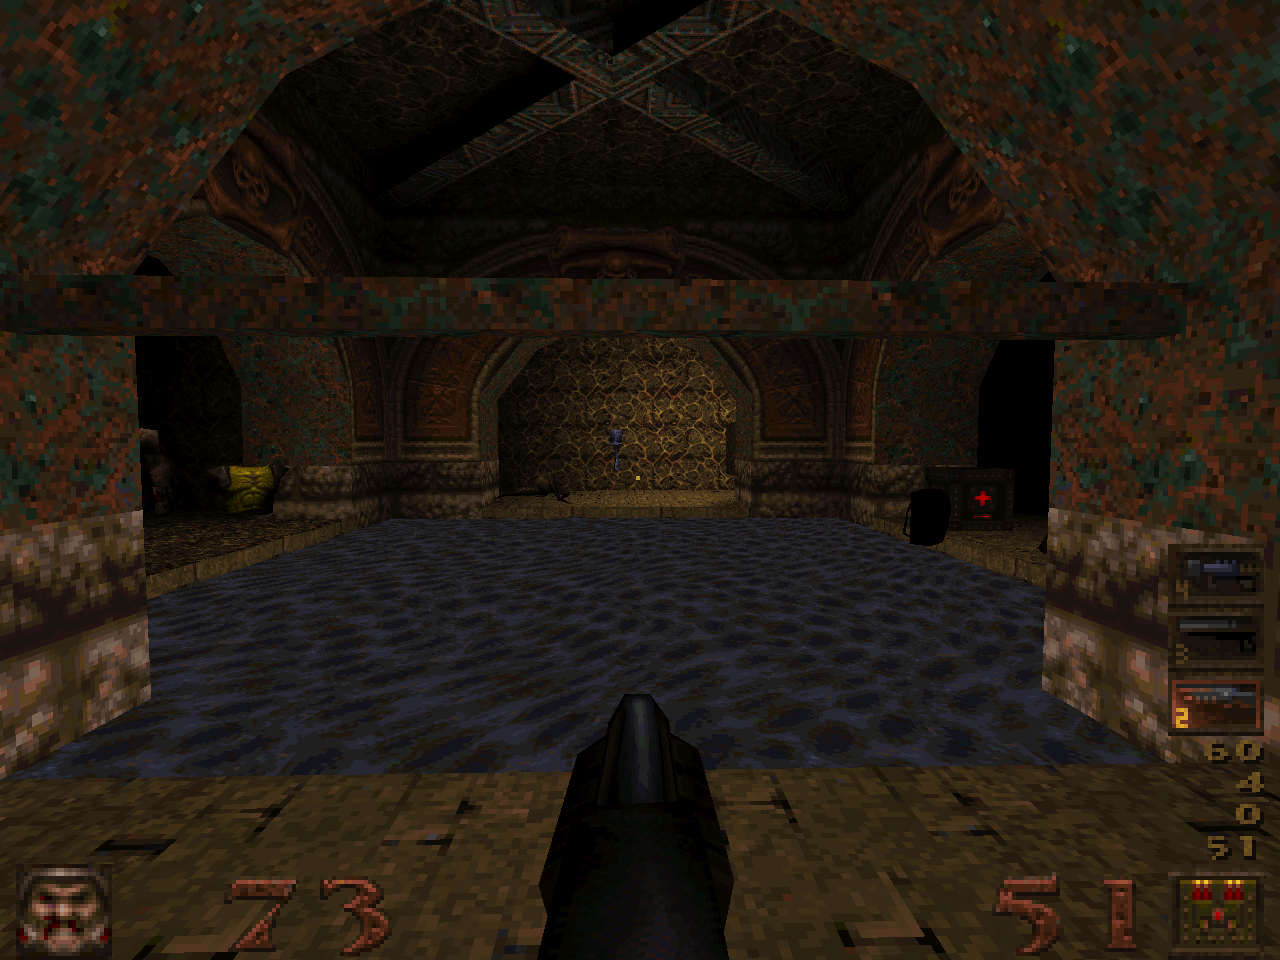 Screen shots from Quake, include two 640x480 TIFF's.